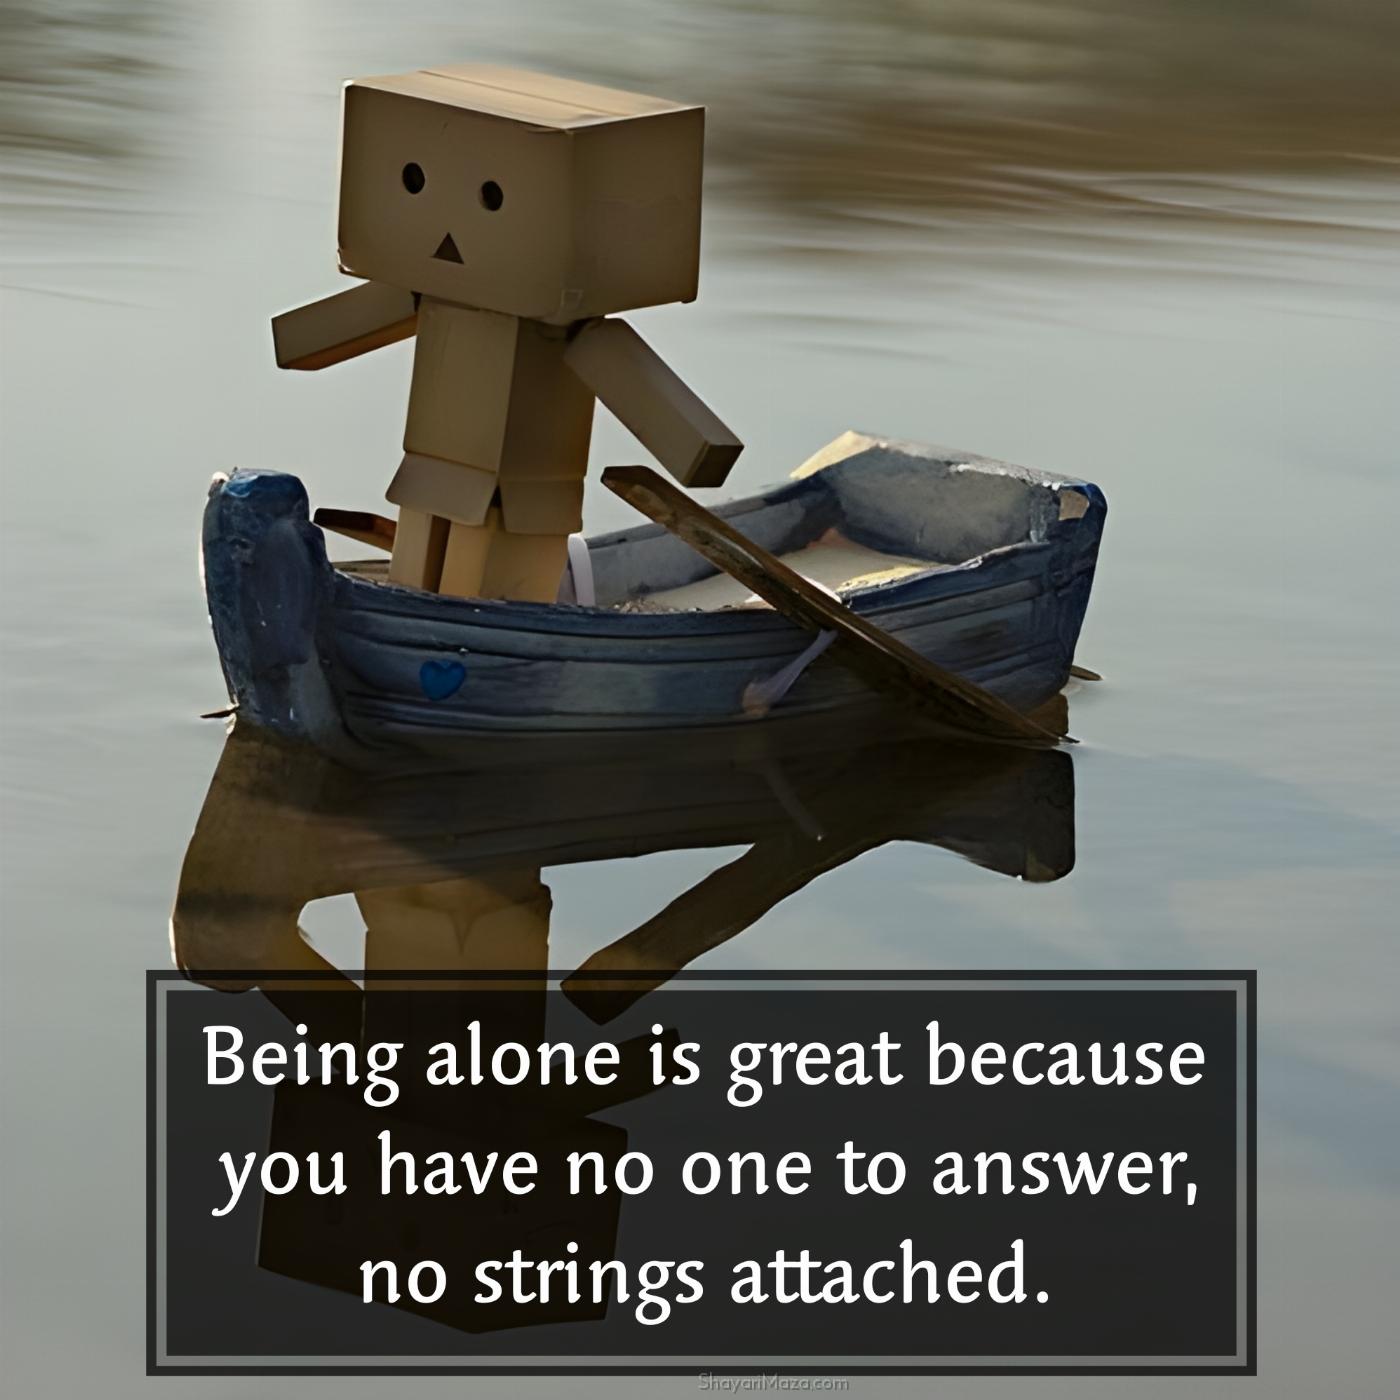 Being alone is great because you have no one to answer